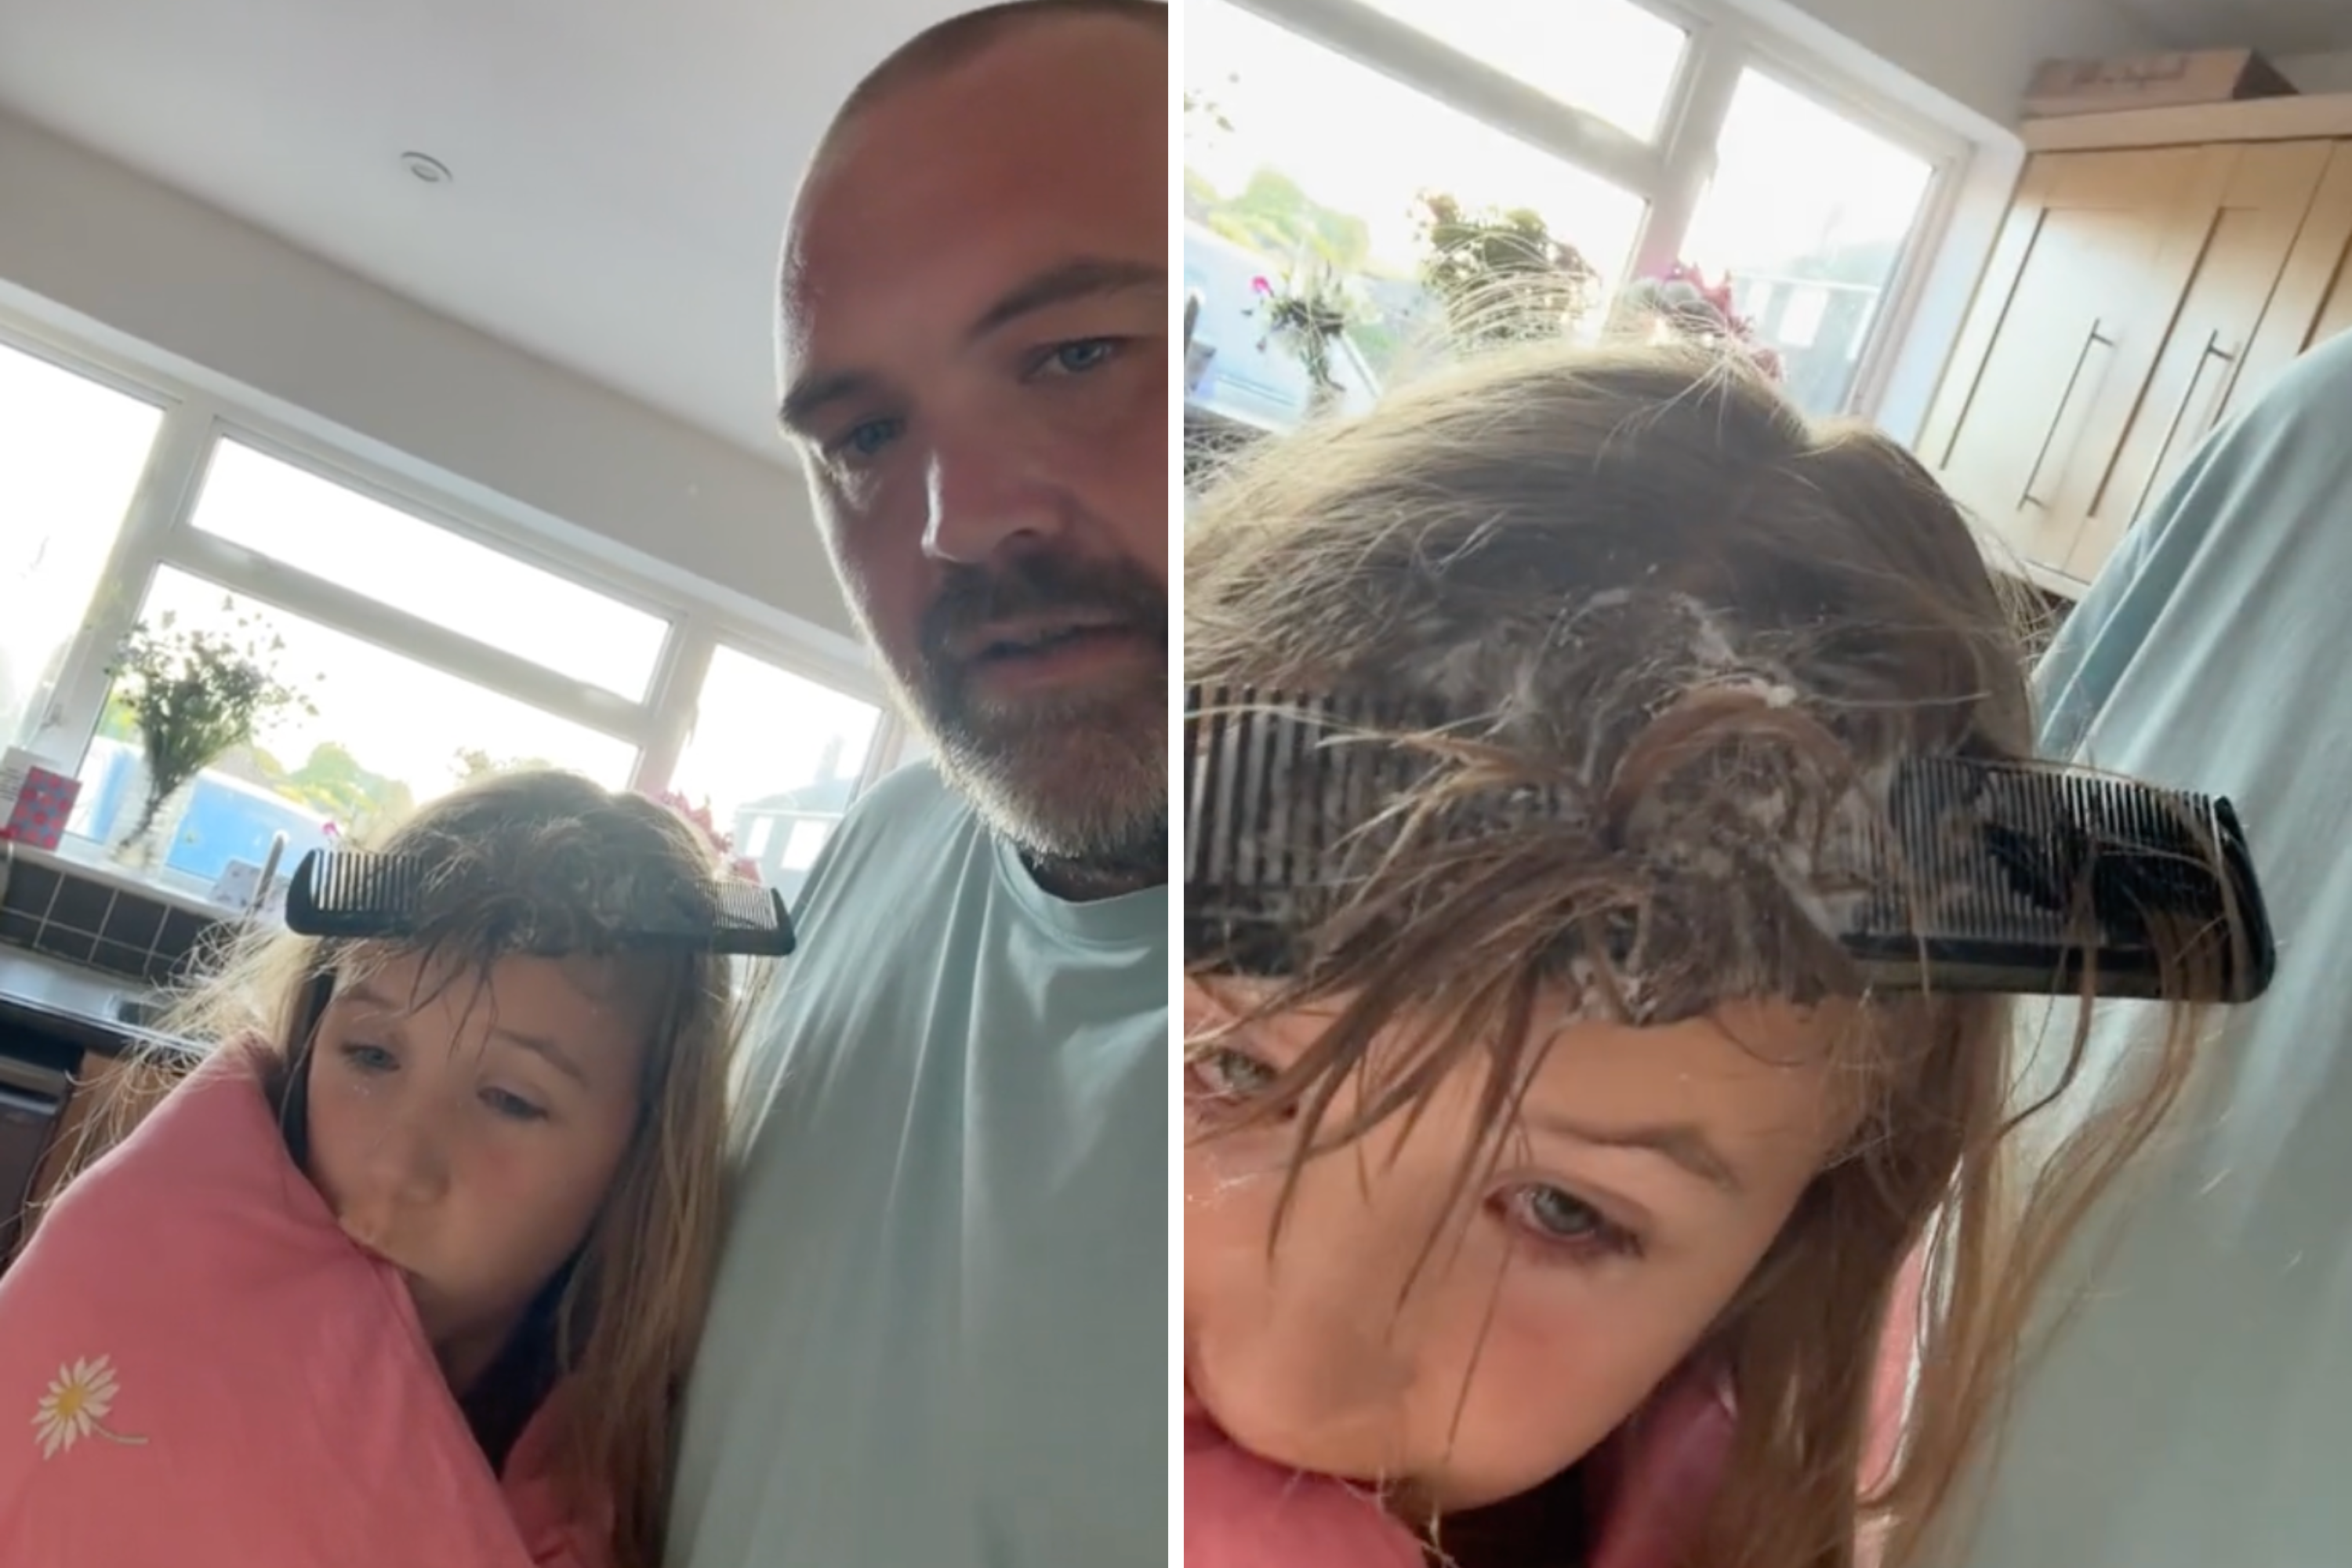 Girl, 9, has epic hair disaster ahead of Taylor Swift concert, dad steps up